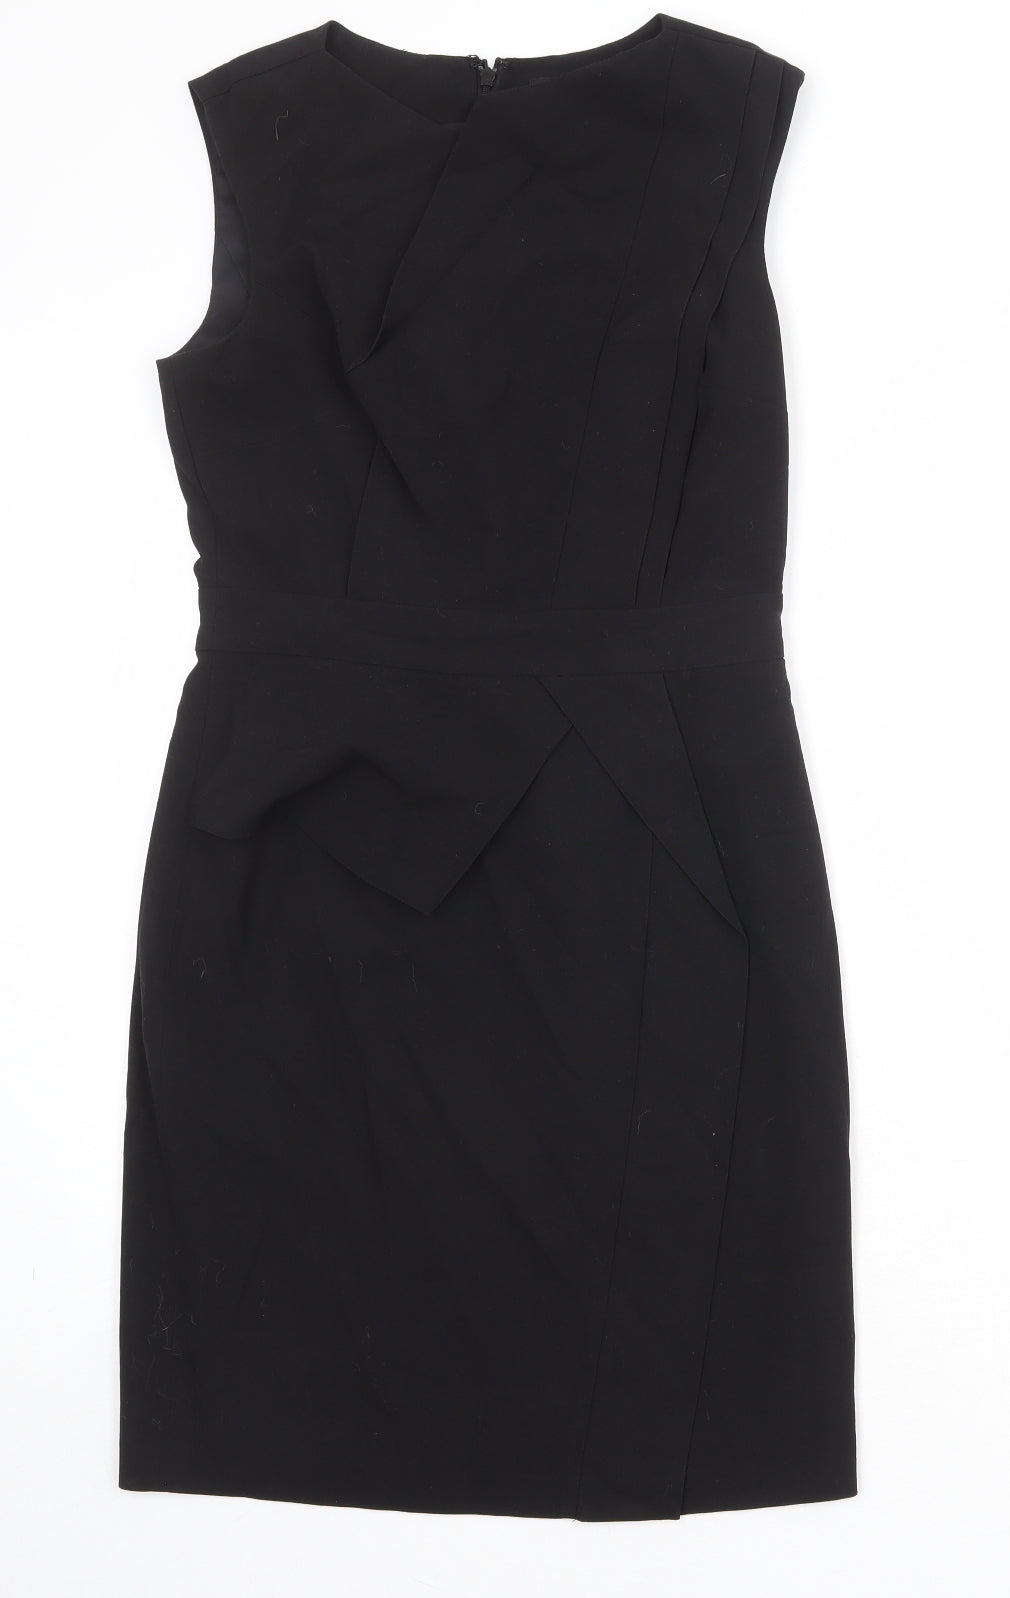 Warehouse Womens Black Polyester Pencil Dress Size 12 Boat Neck Zip - Pleat Front Detail